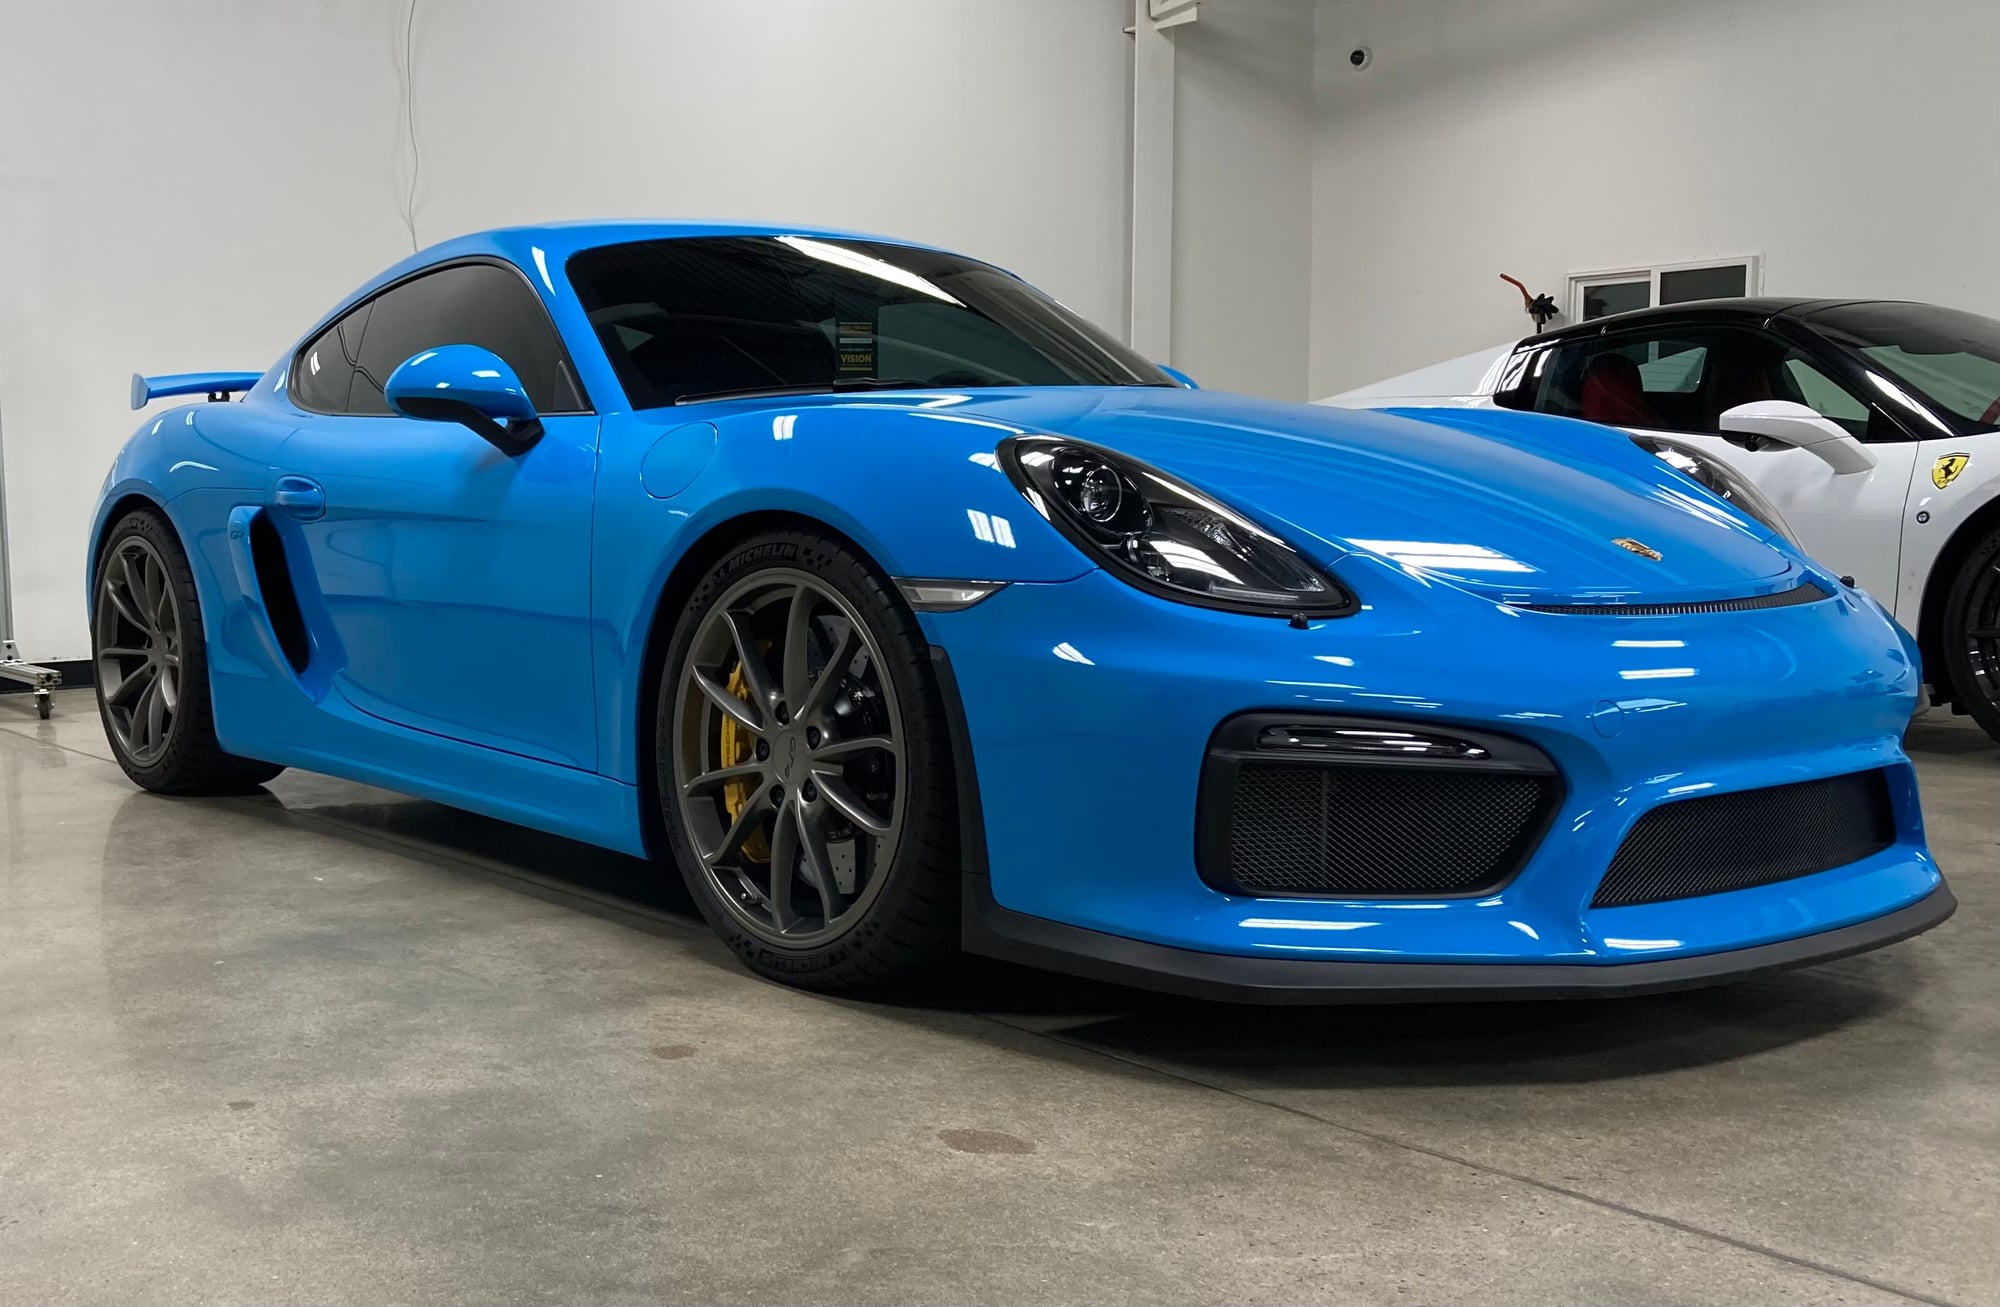 2016 Porsche Cayman GT4 - 2016 GT4 - PTS Riviera Blue - 900 miles - Used - VIN WP0AC2A84GK191240 - 900 Miles - Denver, CO 80210, United States